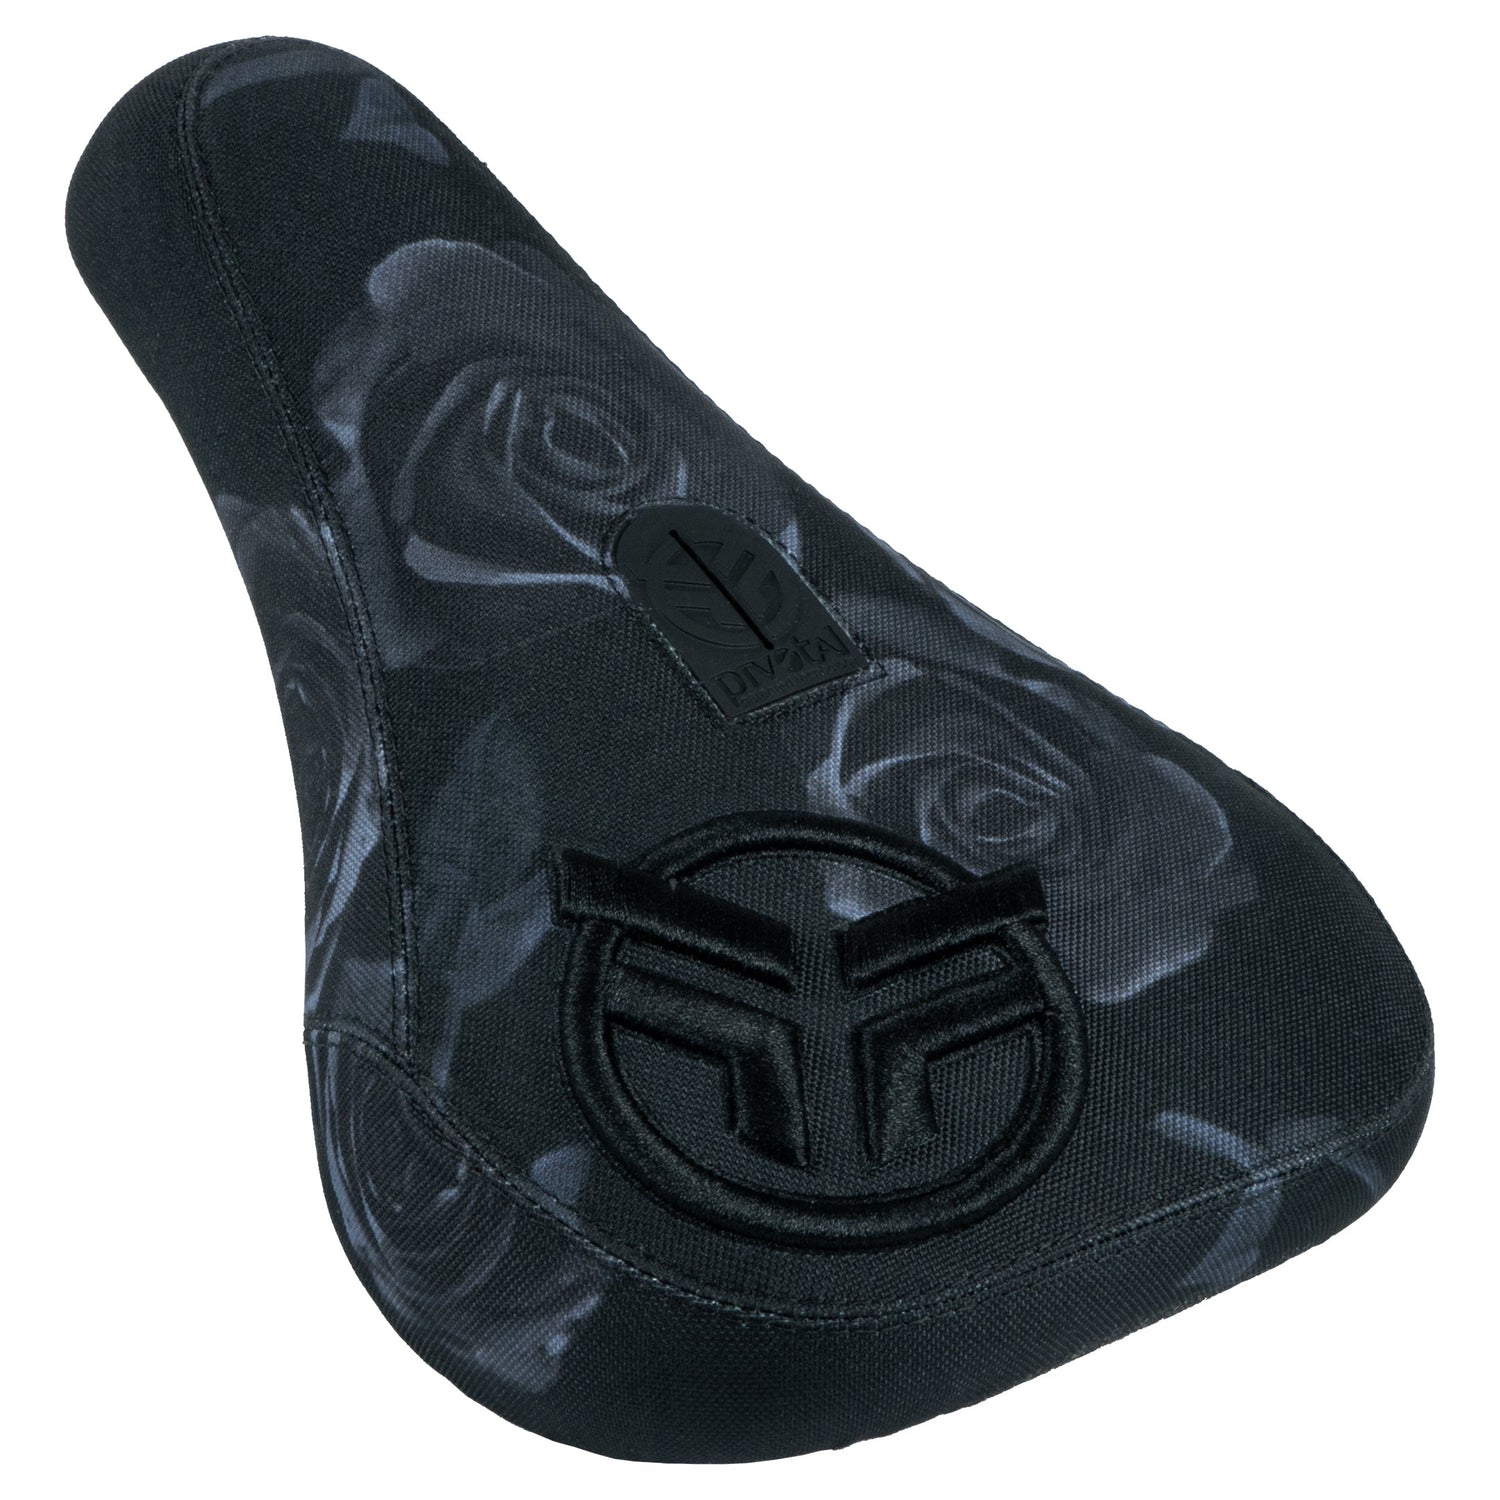 Federal Mid Pivotal Roses Seat - Black / Grey